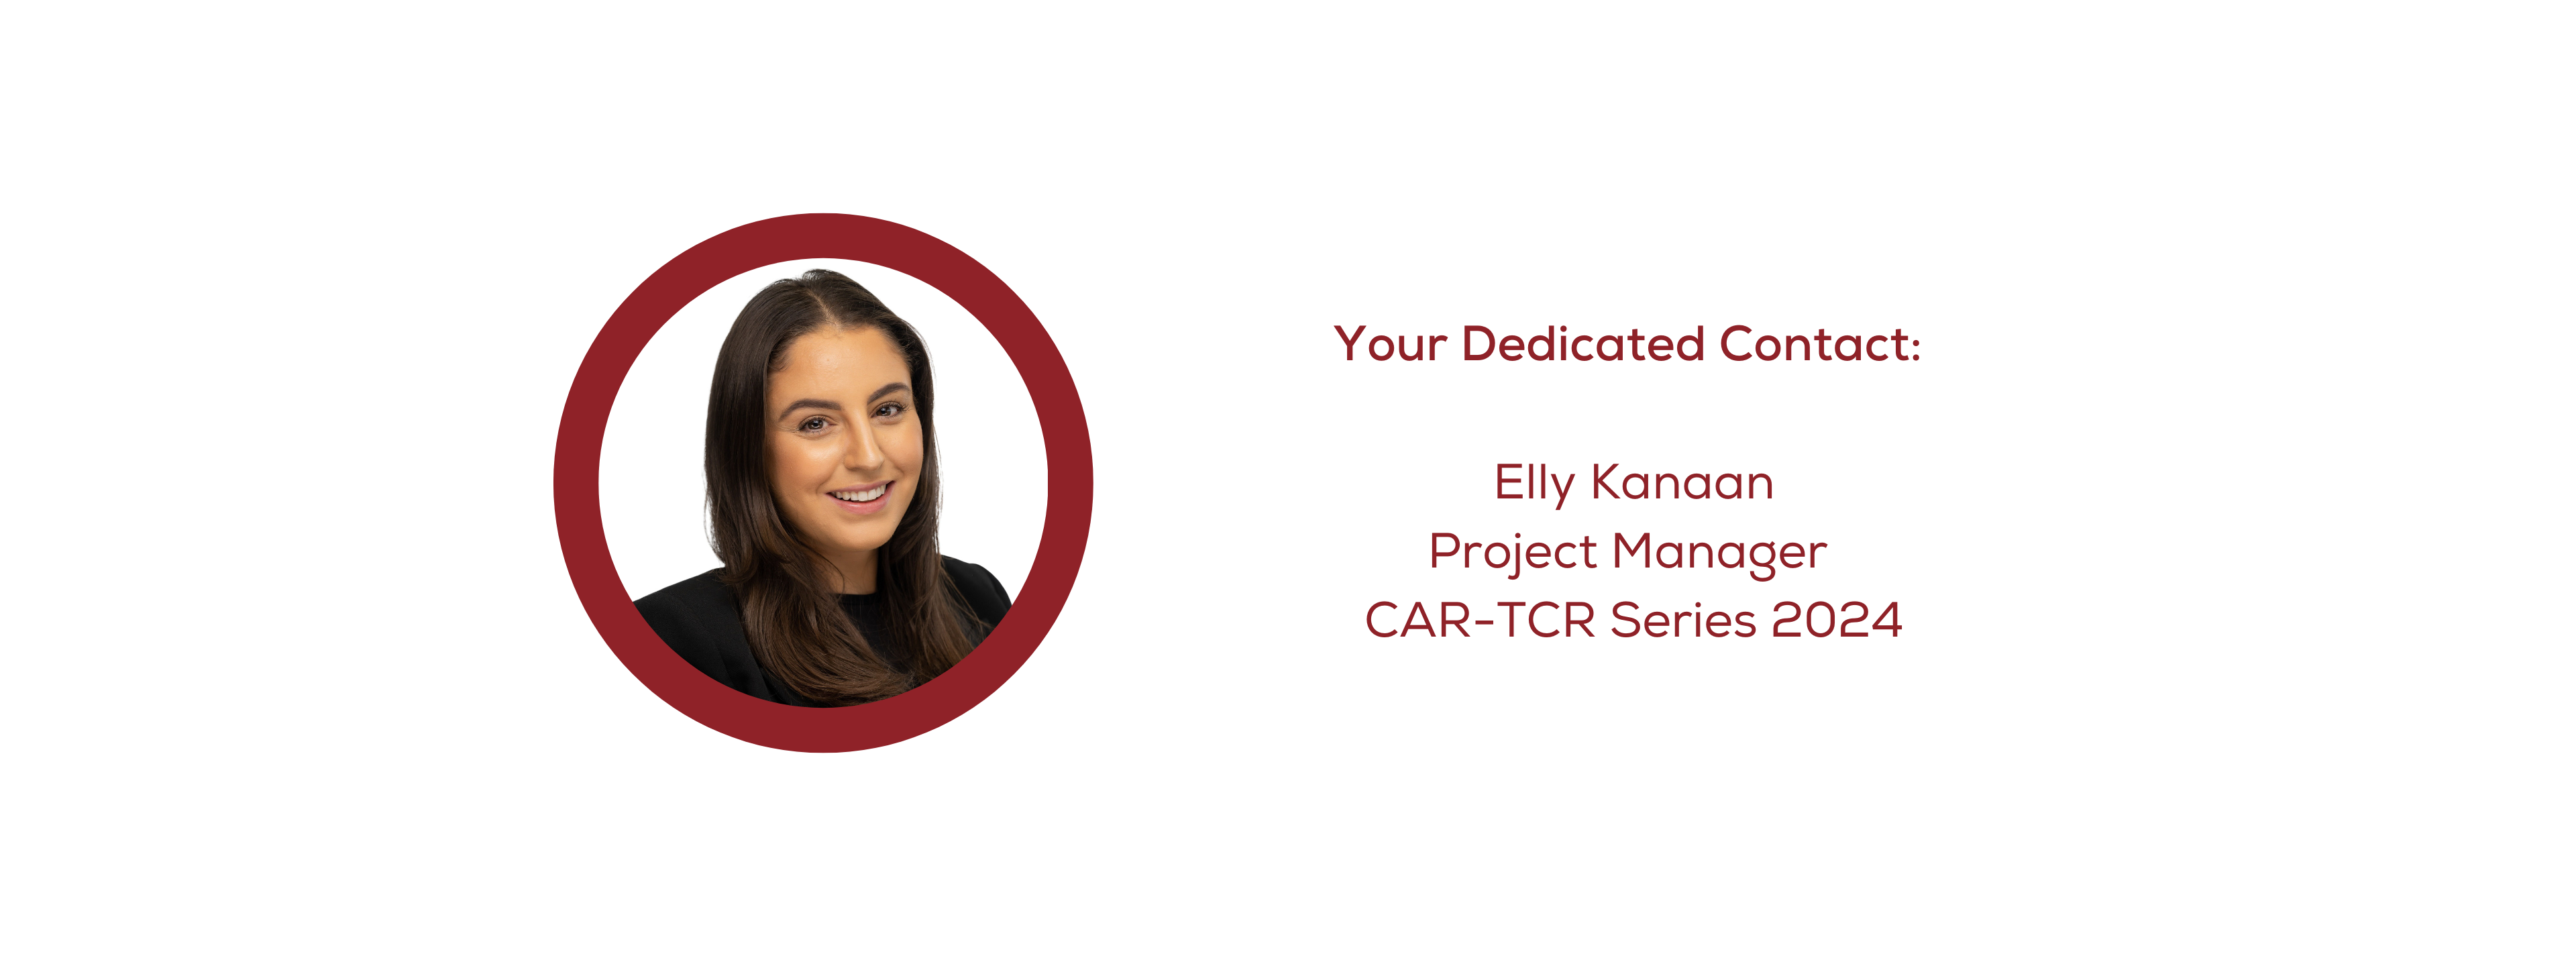 Your Dedicated Contact Elly Kanaan Project Manager CAR-TCR Series 2024 (1)